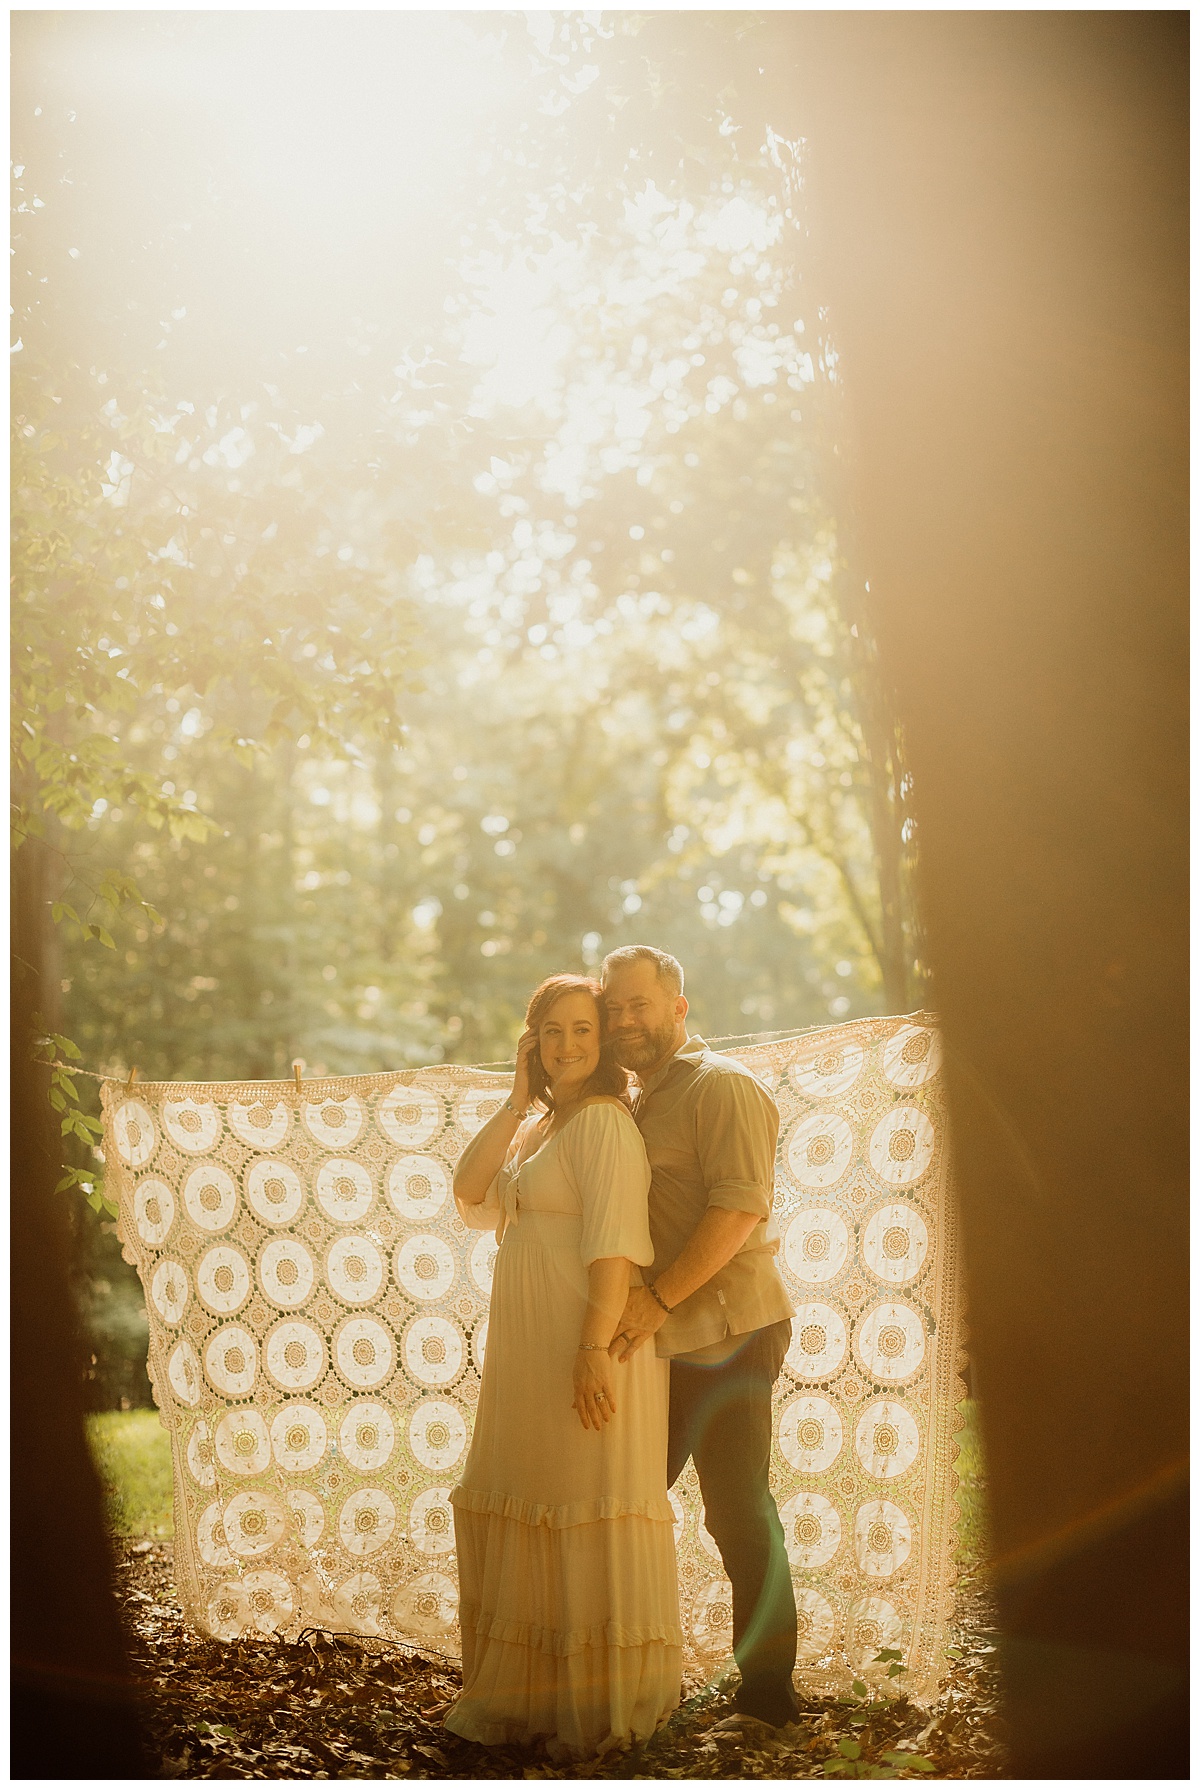 Parents stand together for Magical Backyard Maternity Session